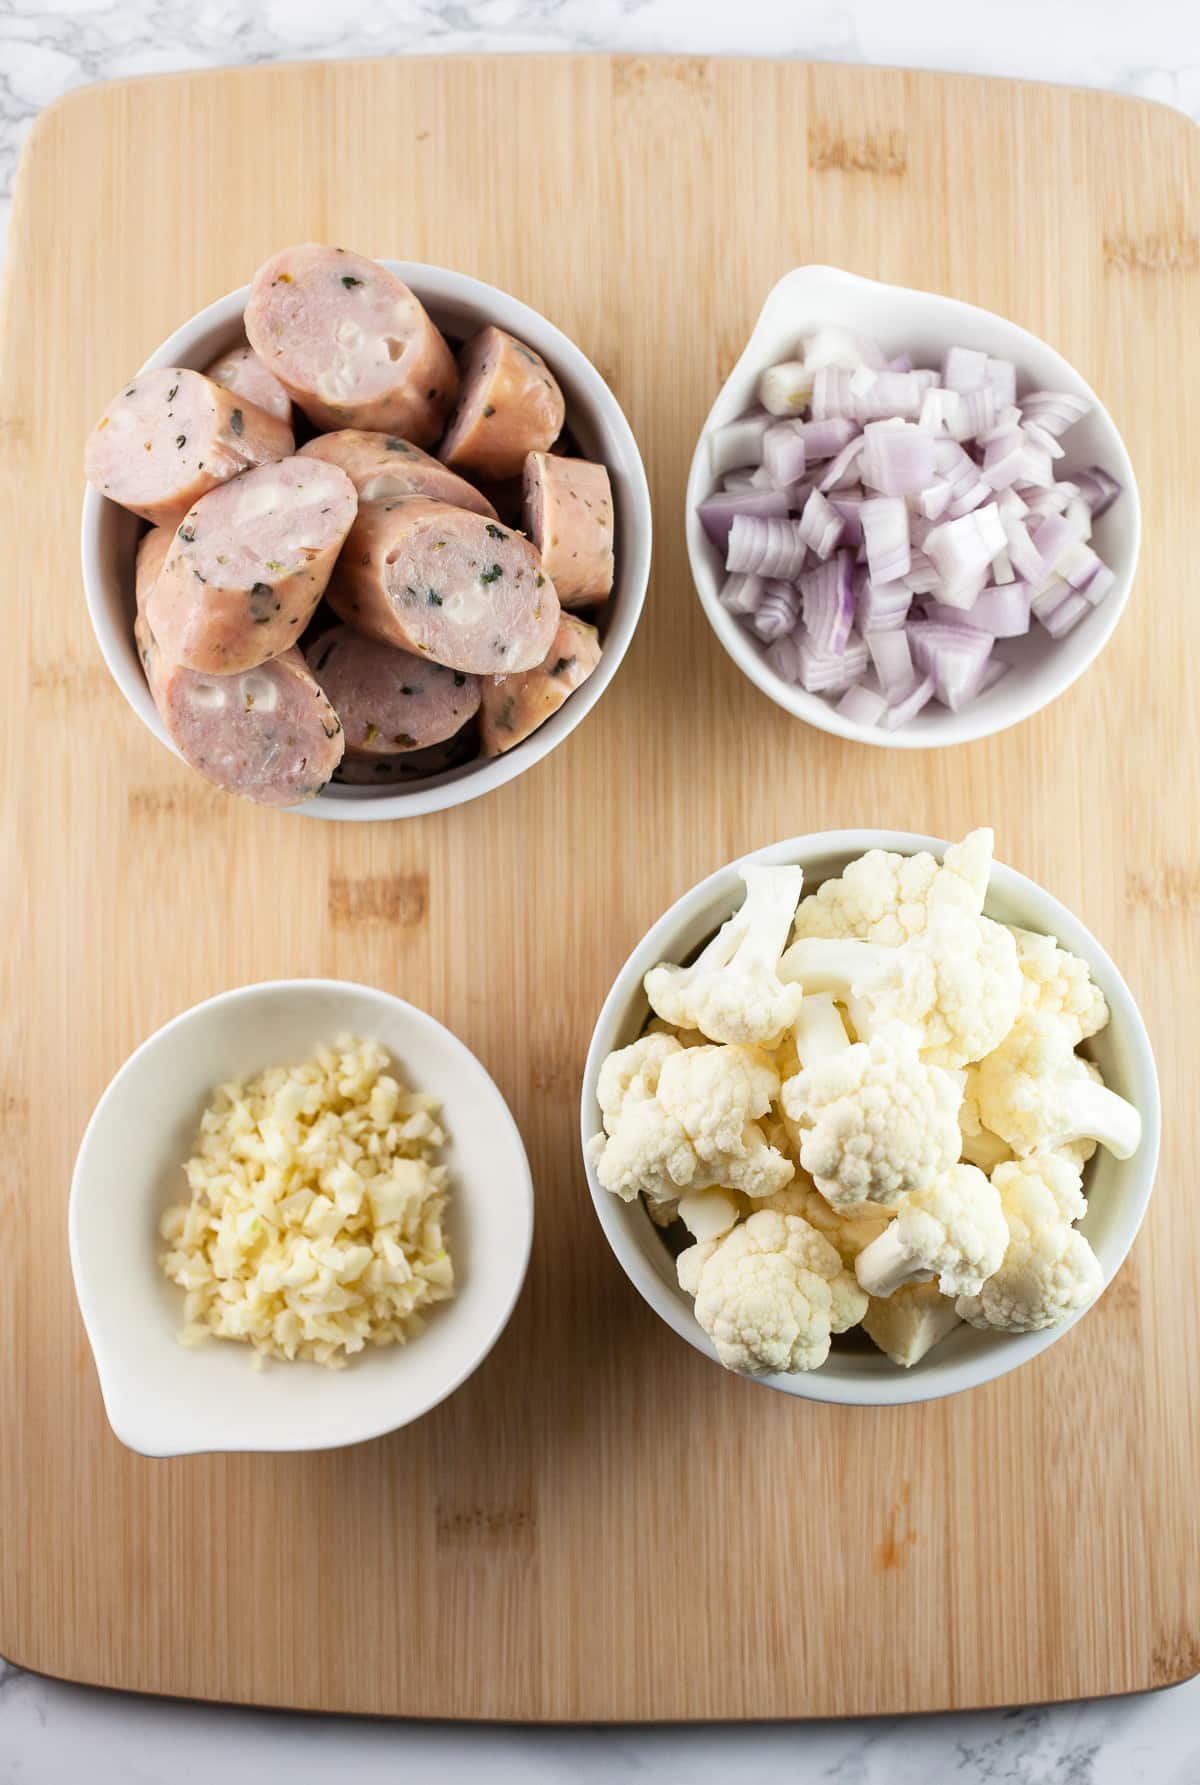 Minced garlic, shallots, cauliflower florets, and sliced chicken sausages in white bowls on wooden cutting board.